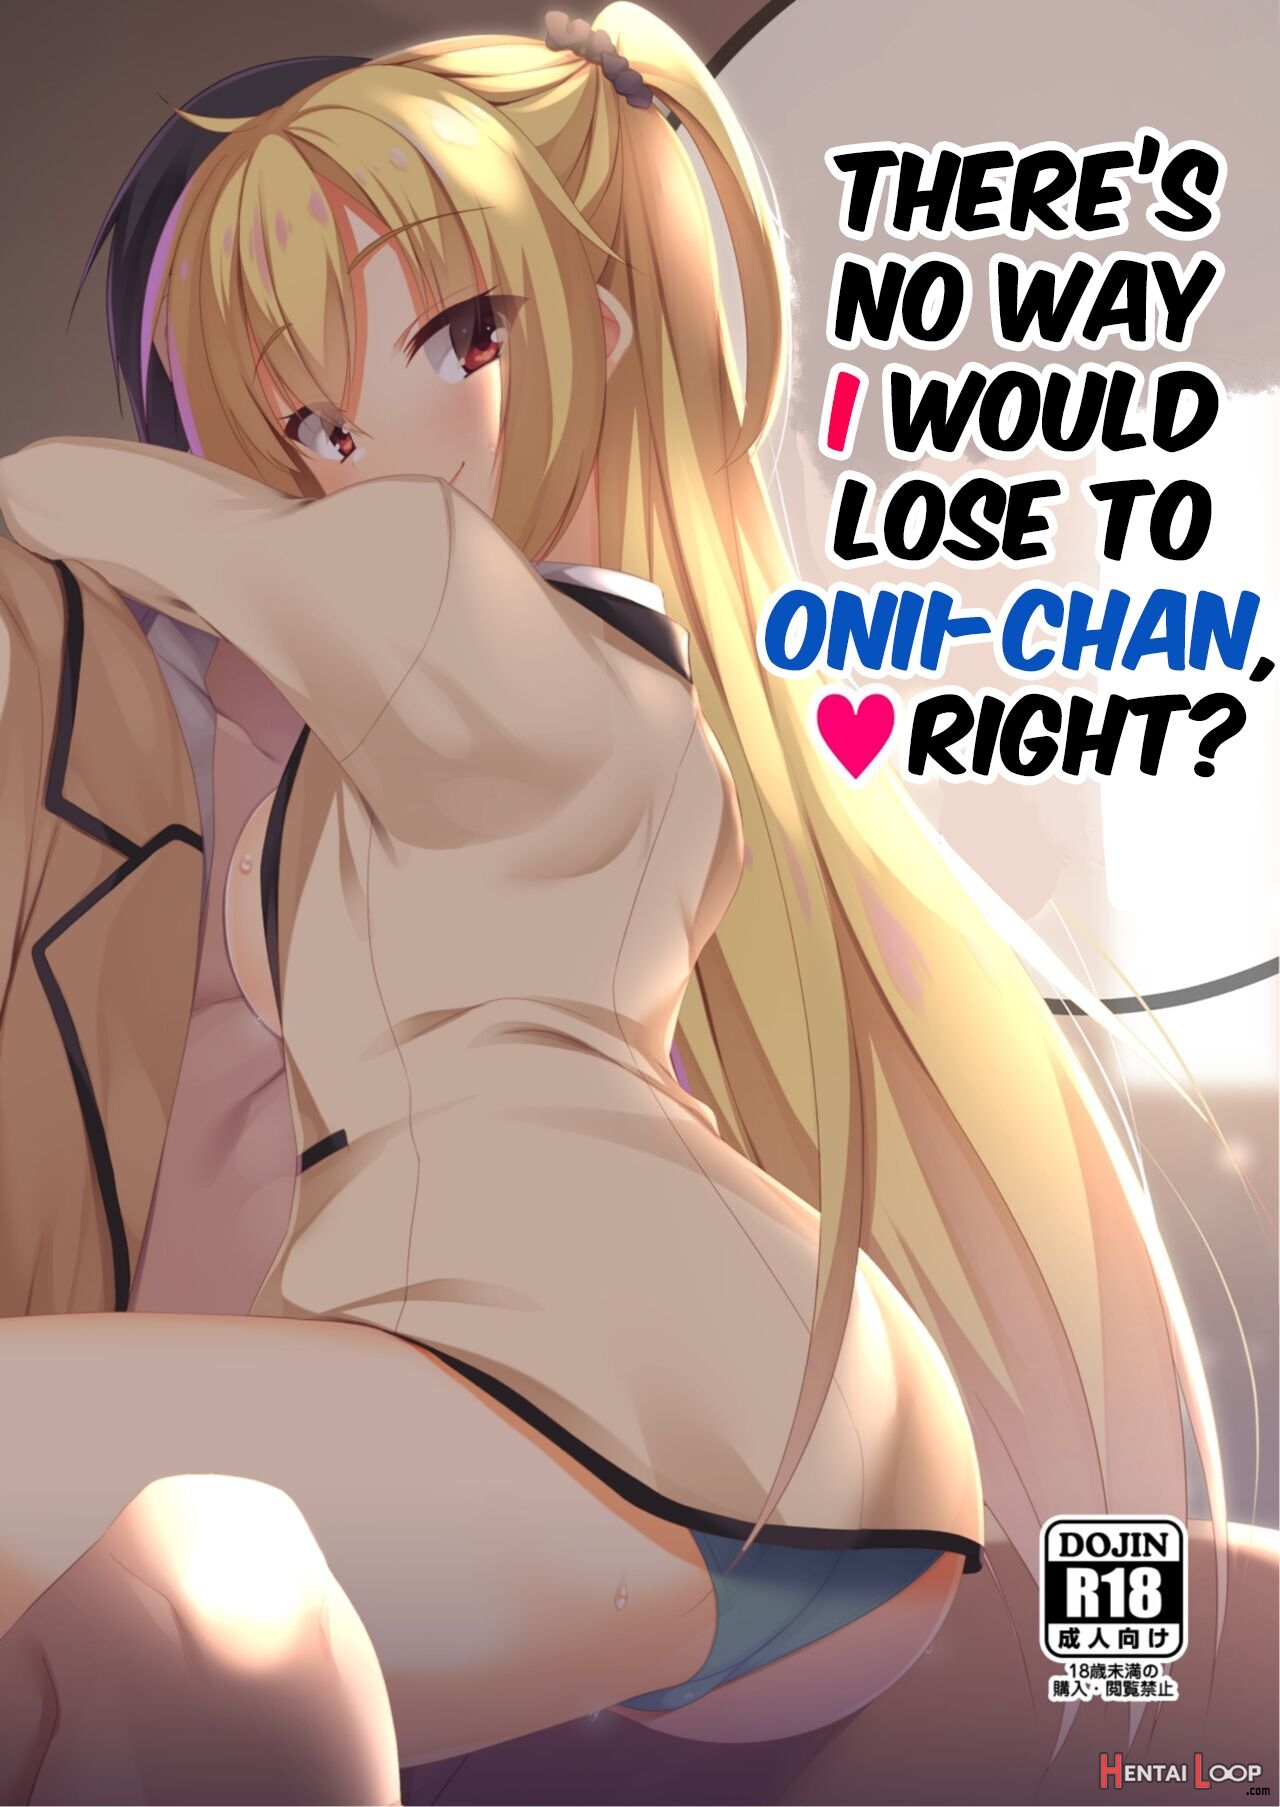 There's No Way I Would Lose To Onii-chan, Right? page 1